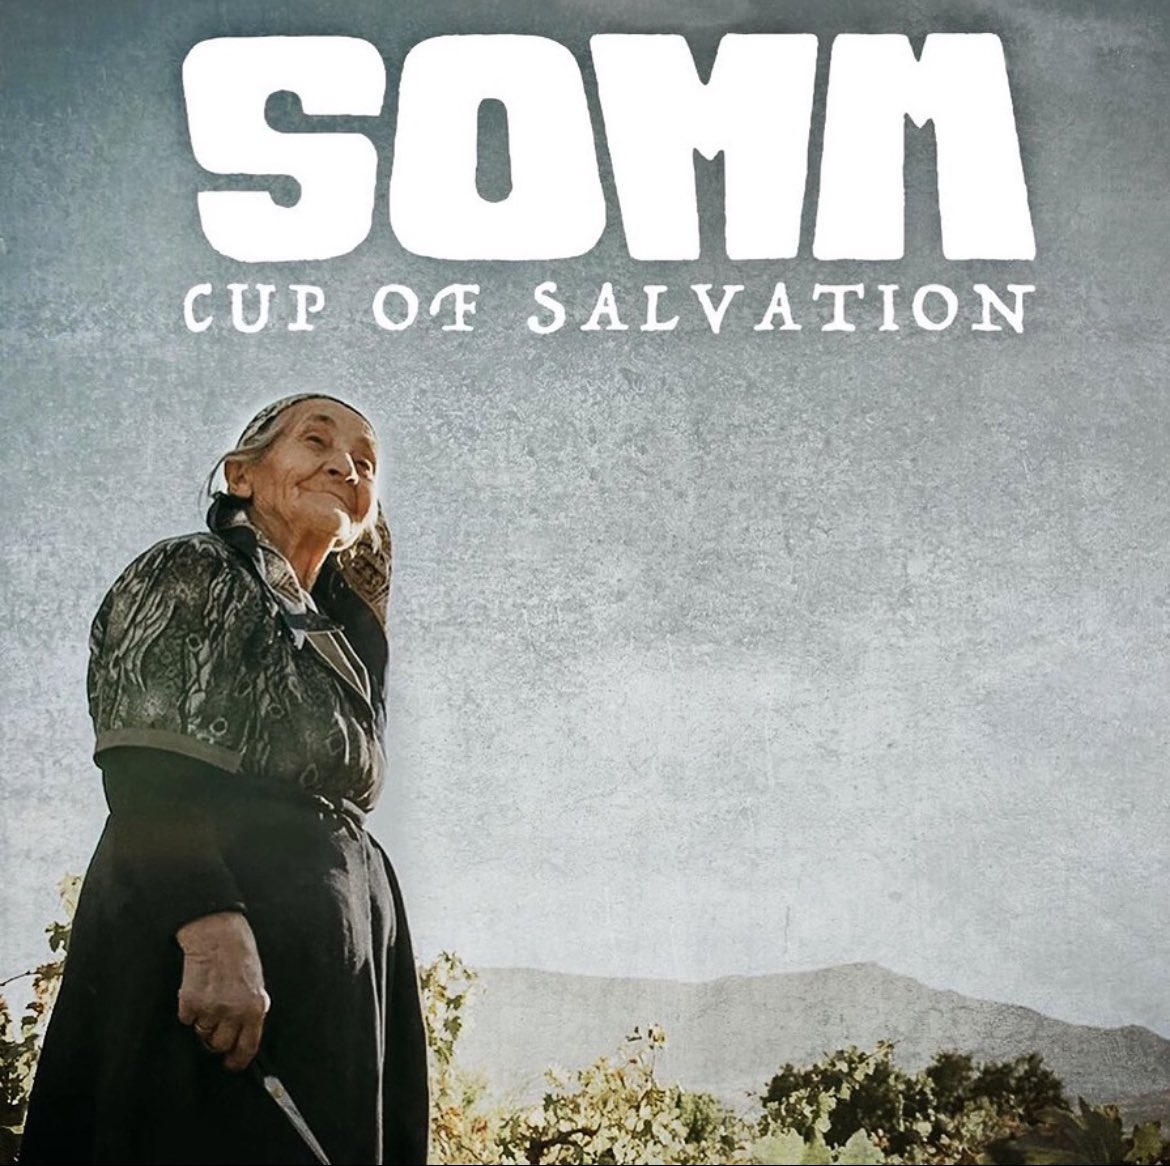 Just announced! SOMM: Cup of Salvation has been nominated for the James Beard Award! Such amazing news to wake up to! Go @SOMM_FILM team go!!!